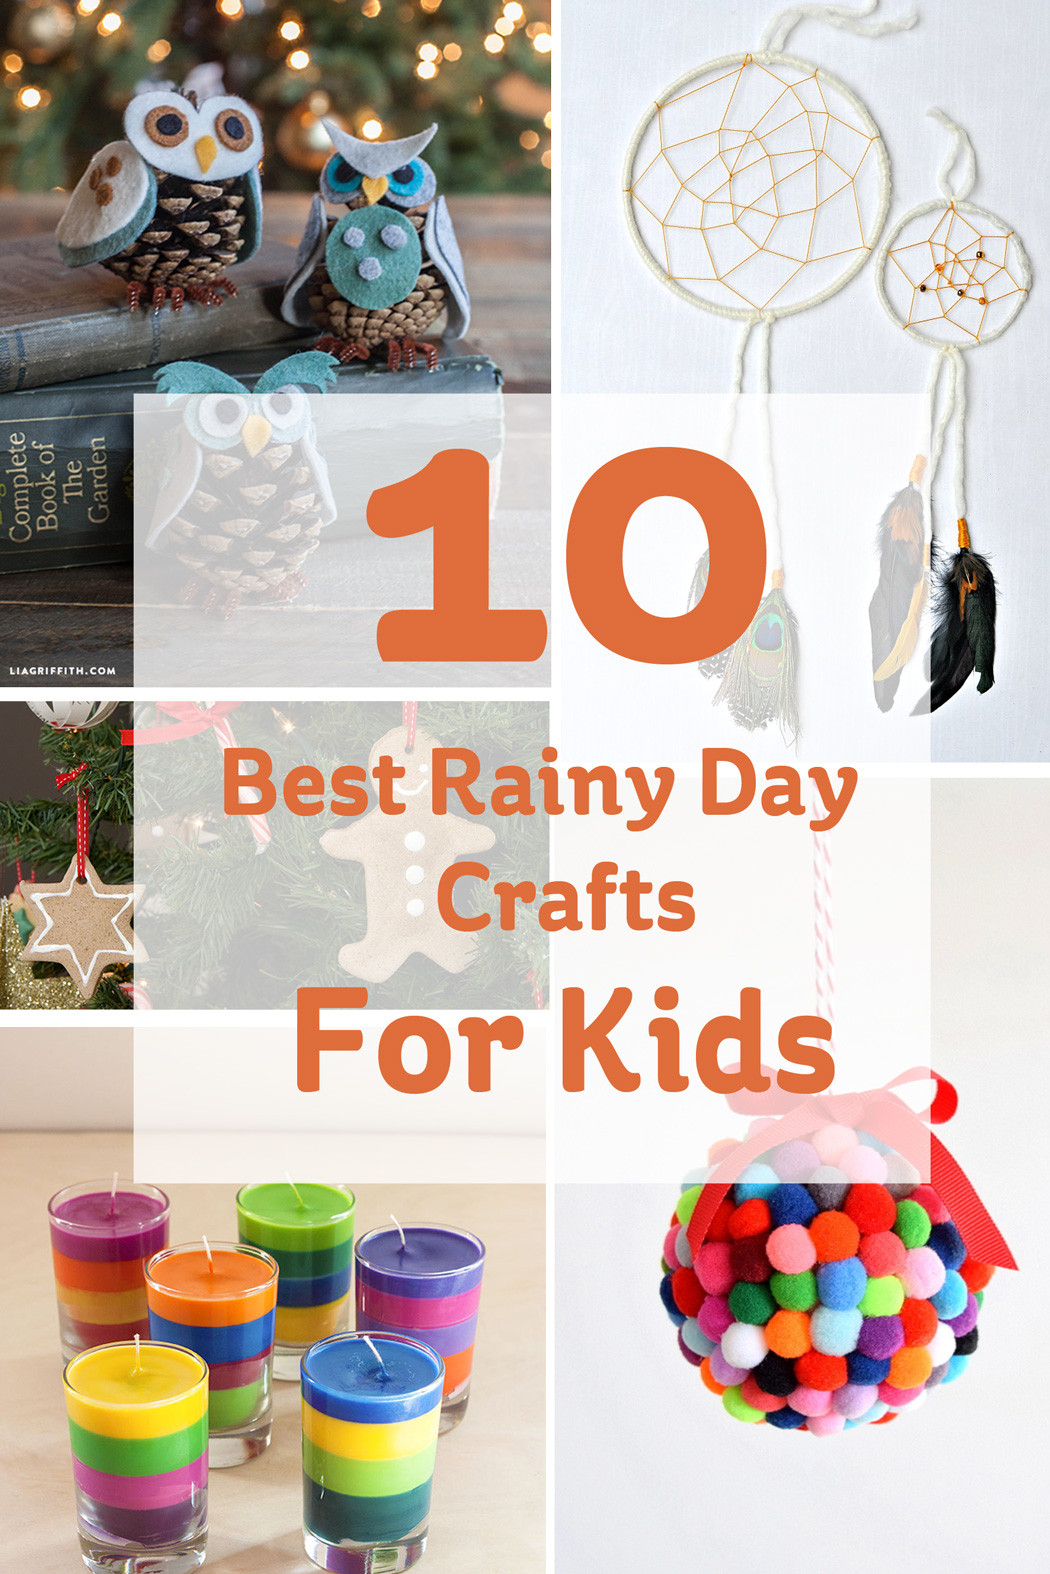 Rainy Day Crafts For Kids
 The 10 Best Rainy Day Crafts for Kids Hobbycraft Blog